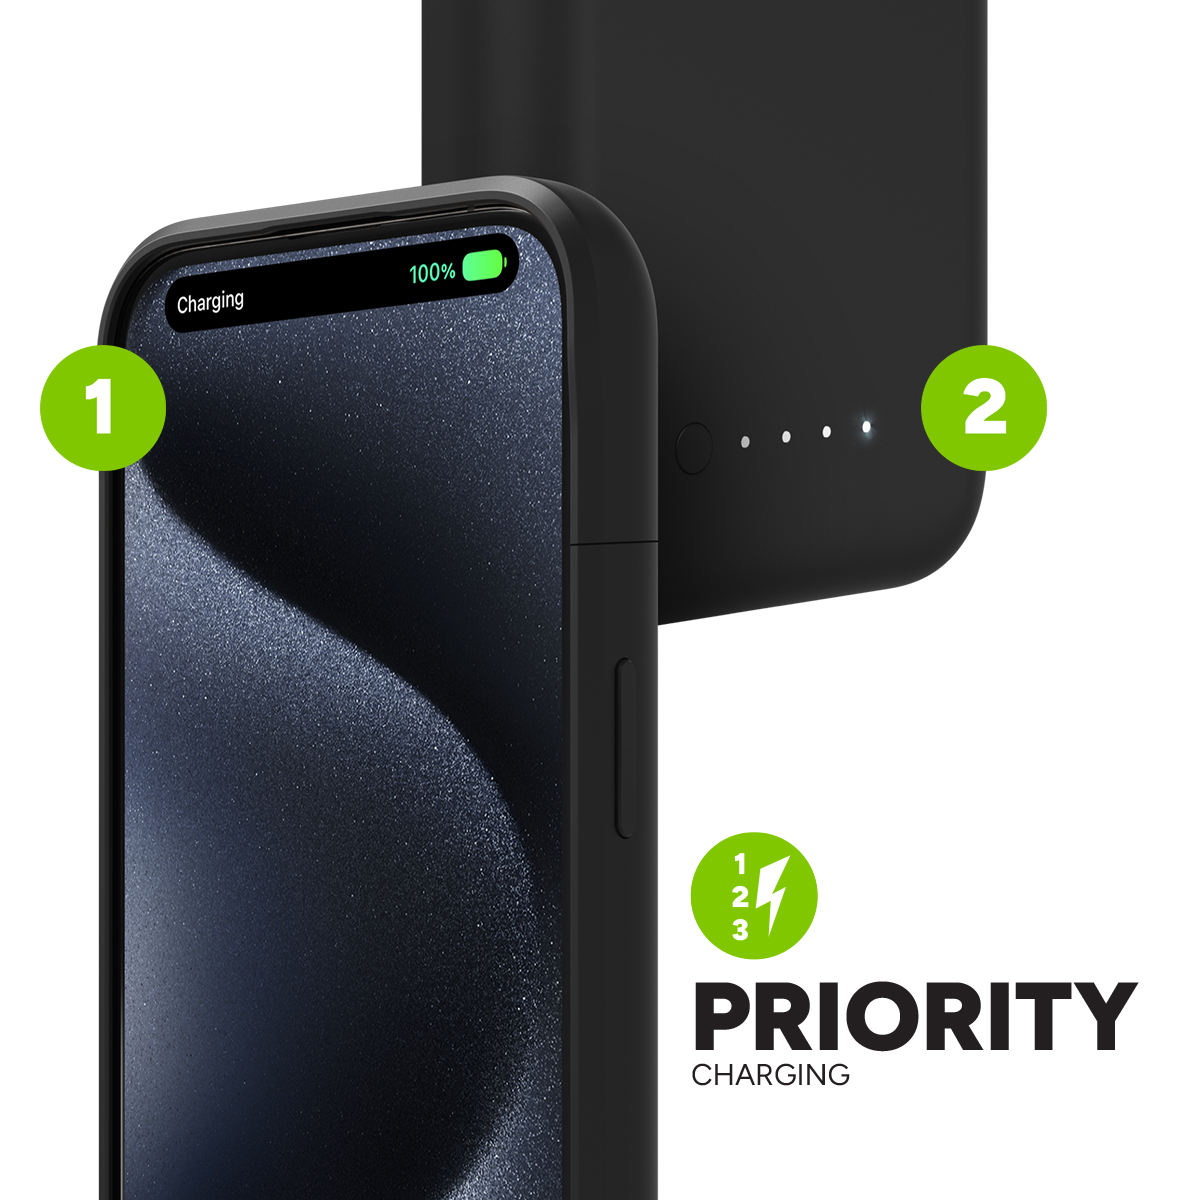 Priority Charging||
Power is channeled to your iPhone first and then the juice pack battery.